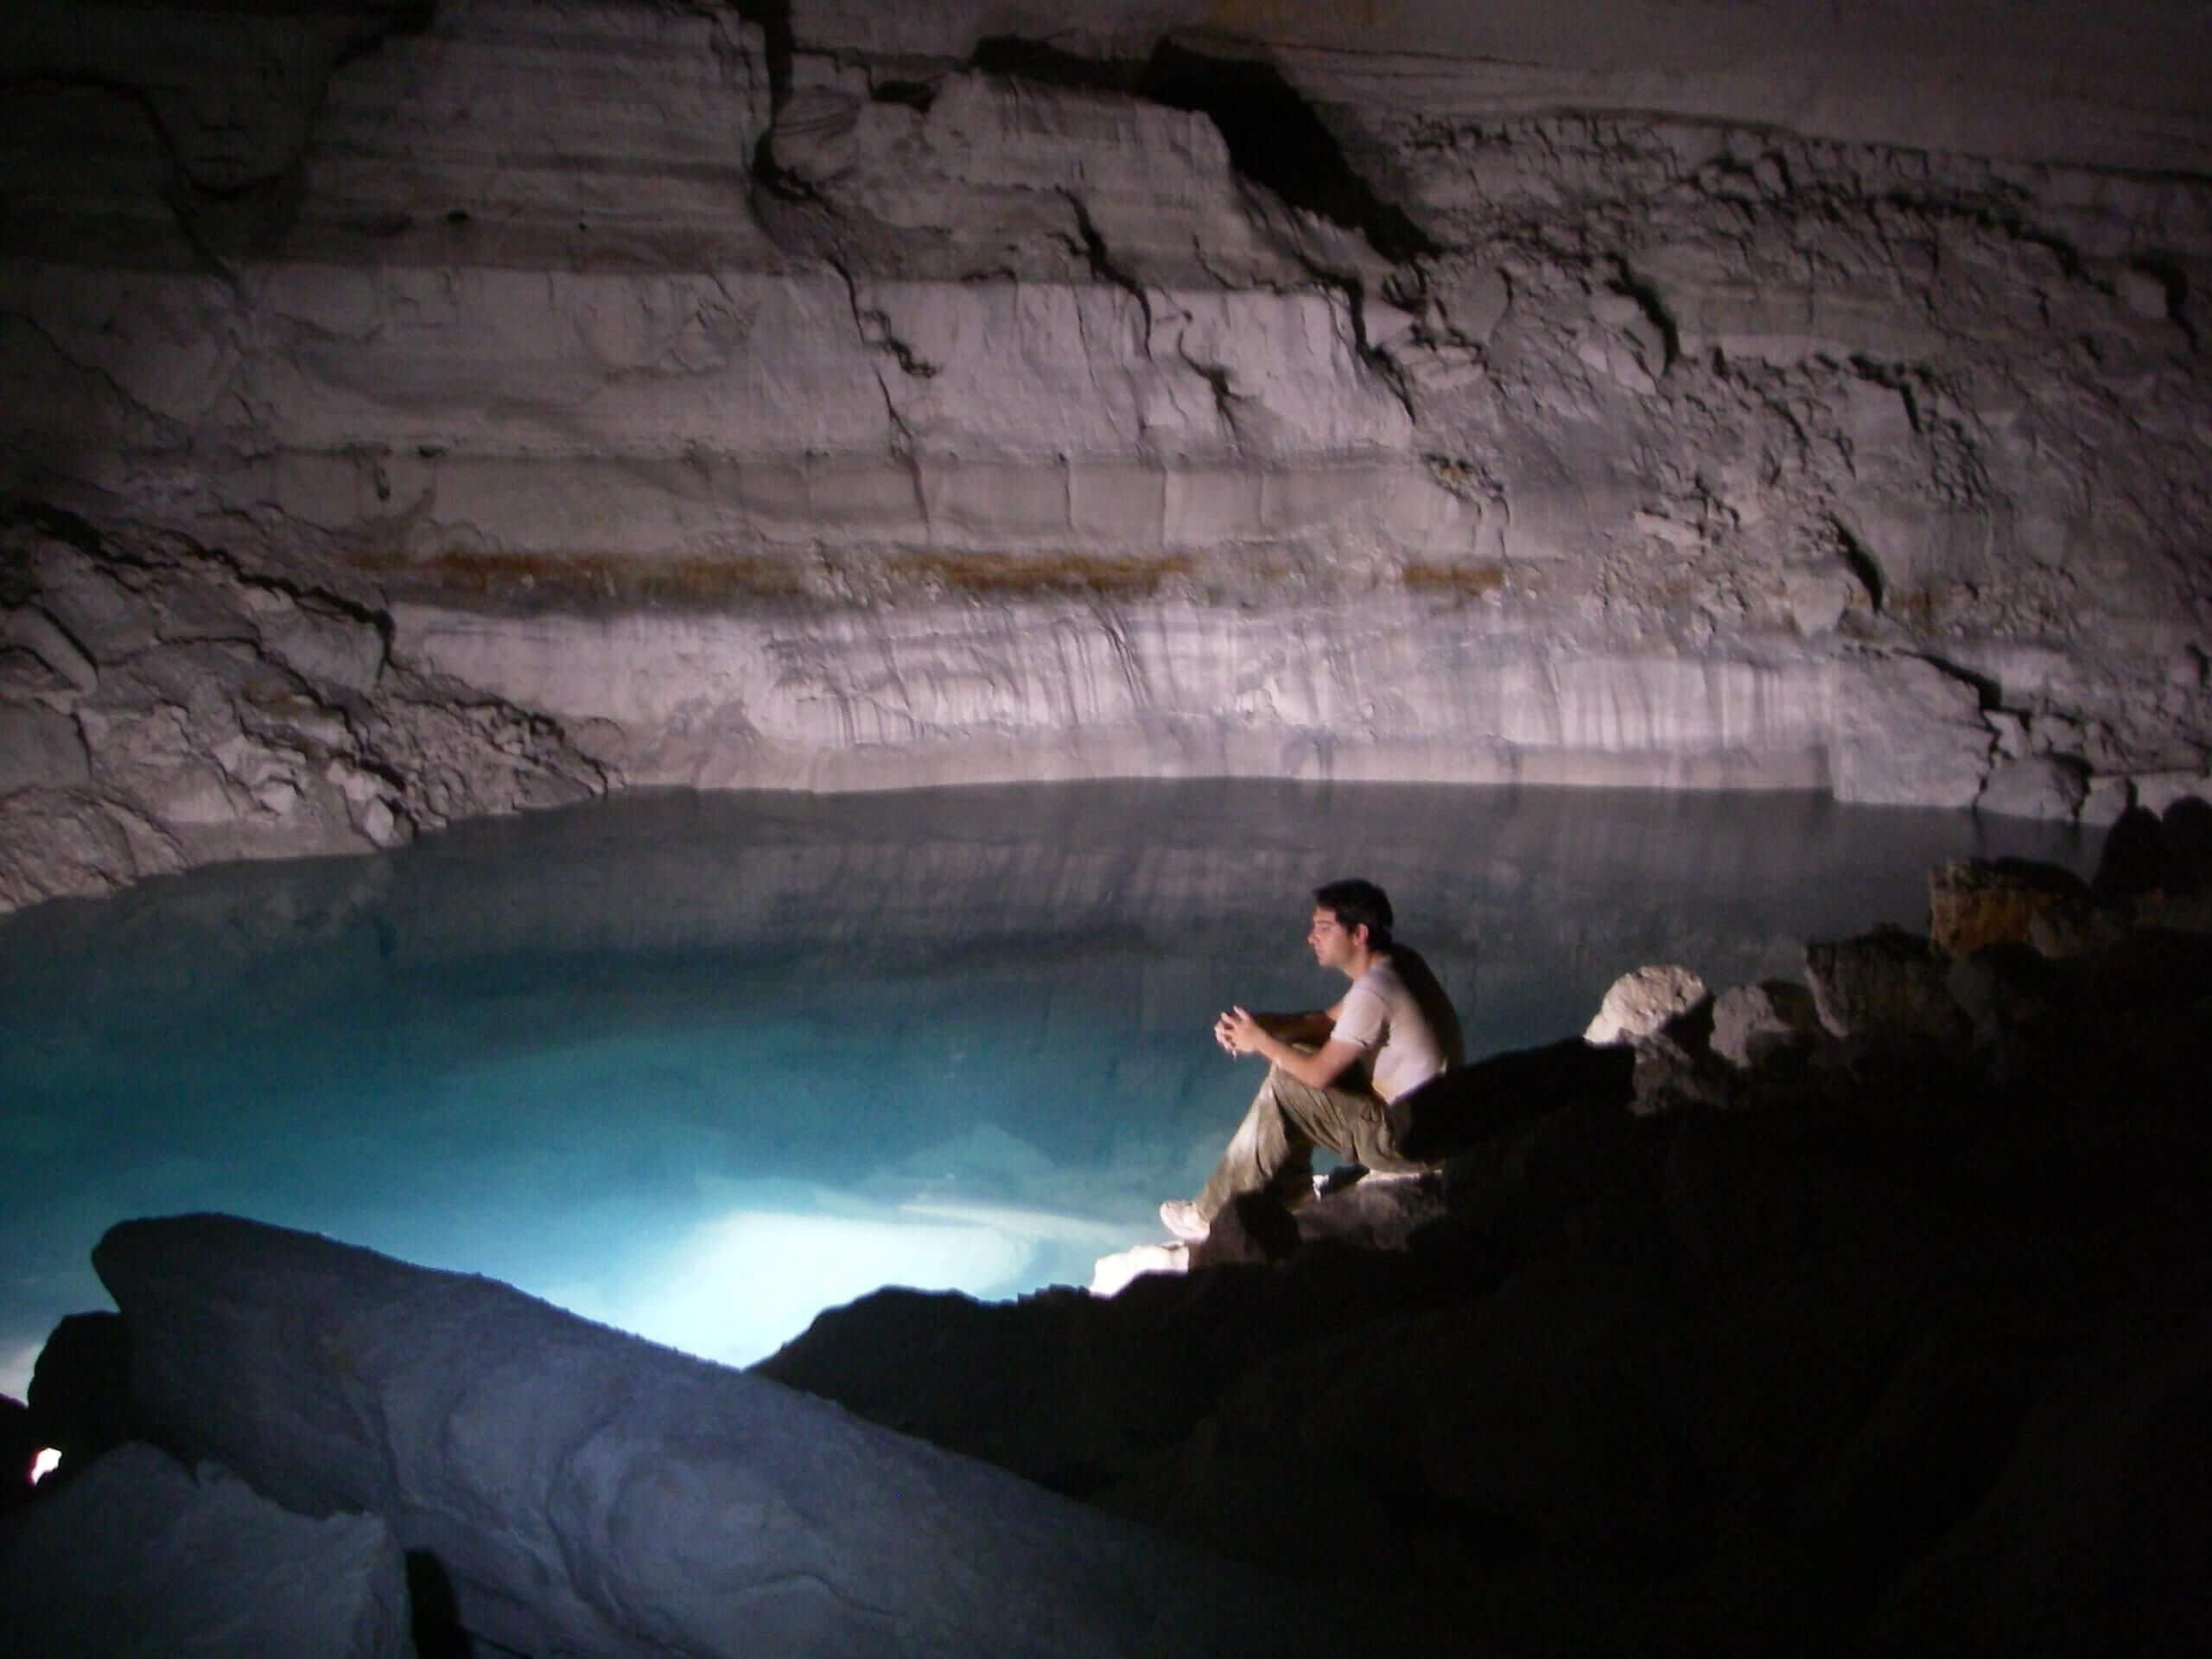 The lake in the Eilon cave was photographed by Y. Naaman courtesy of the Hebrew University